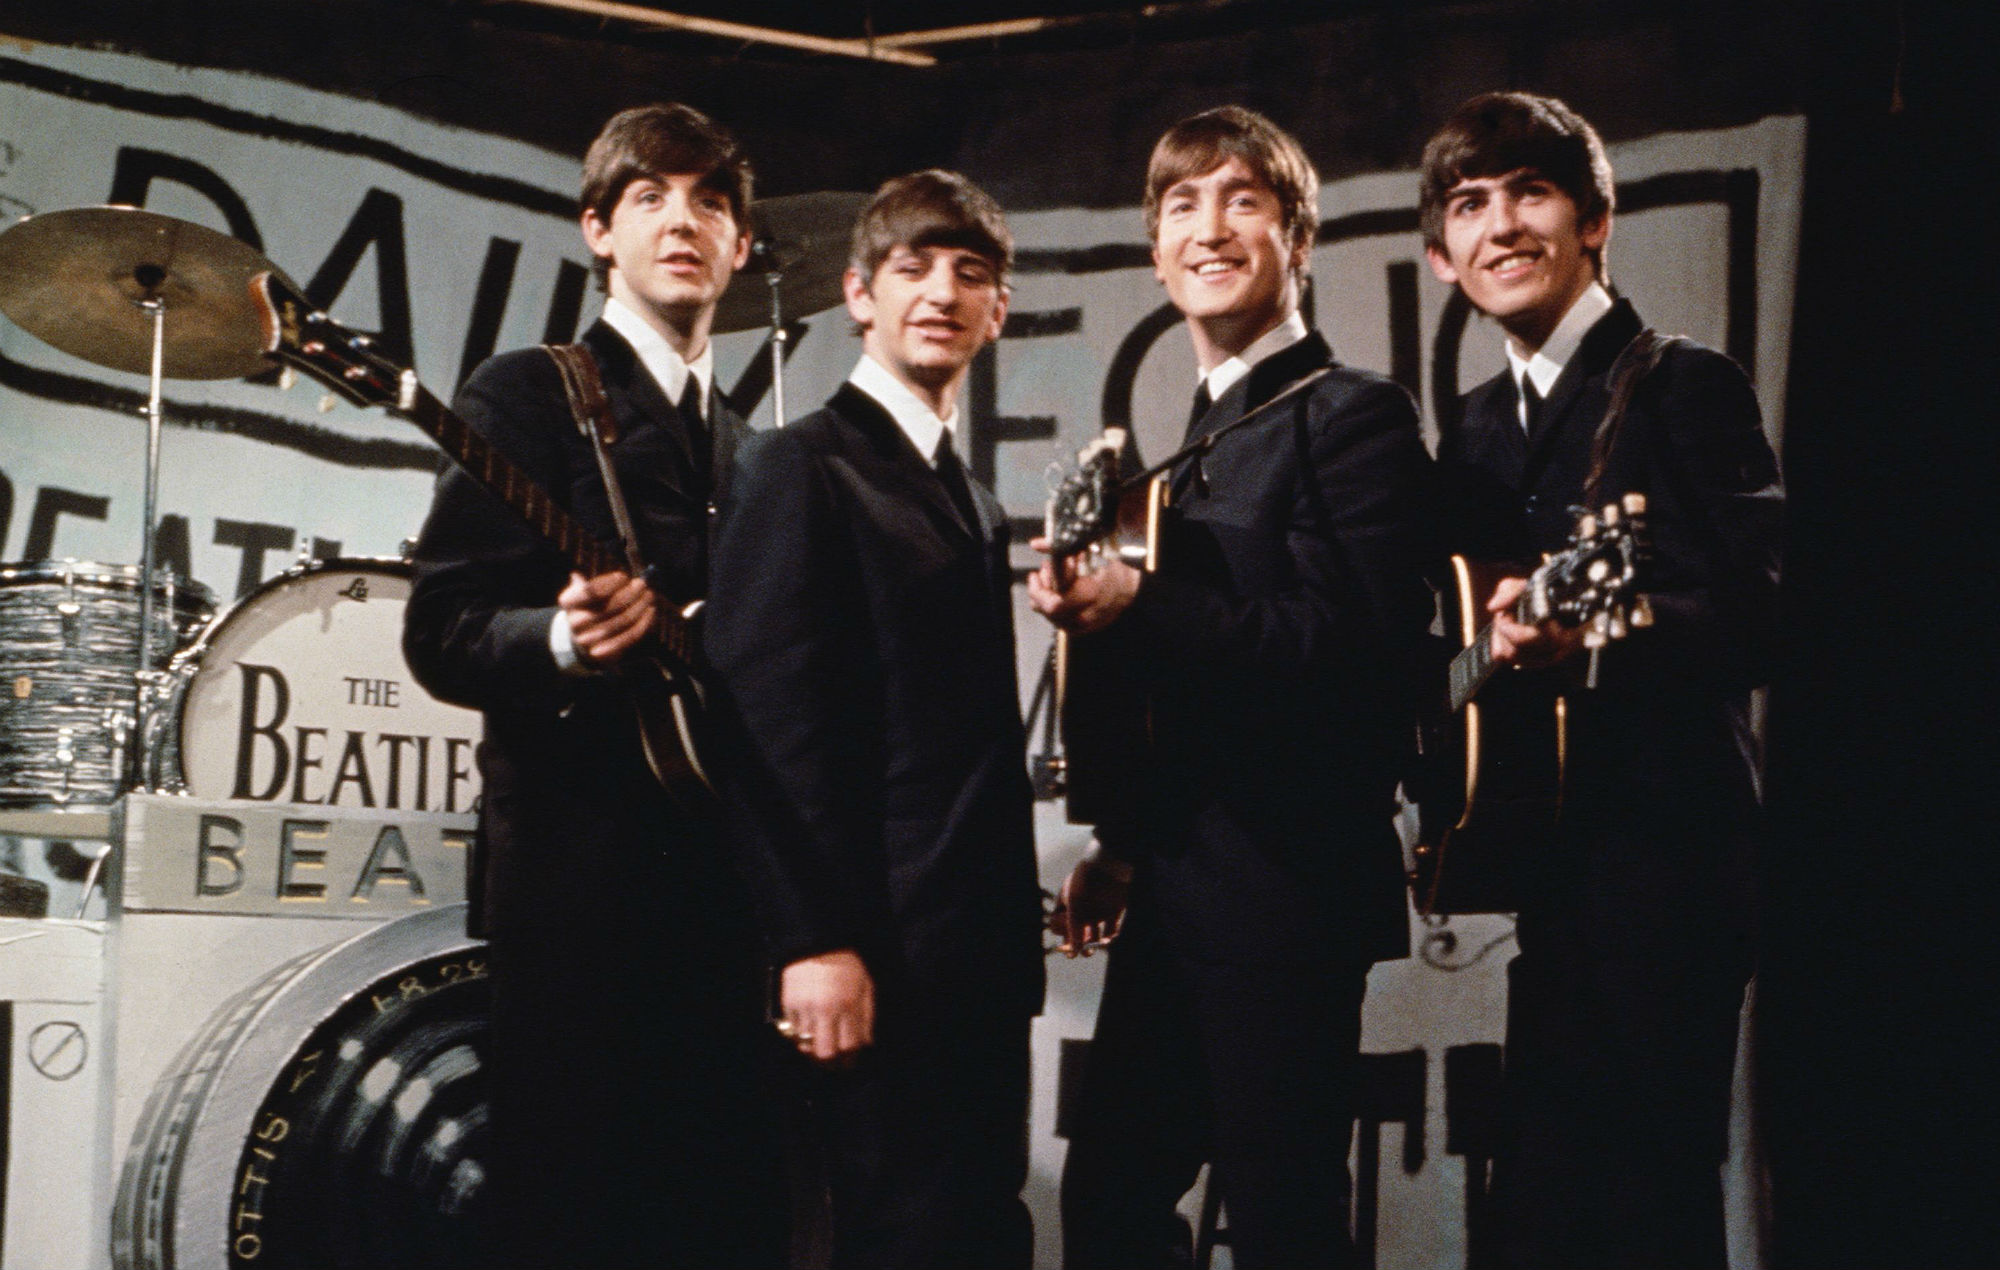 Lost Beatles tape to be restored and given to “national cultural institution”